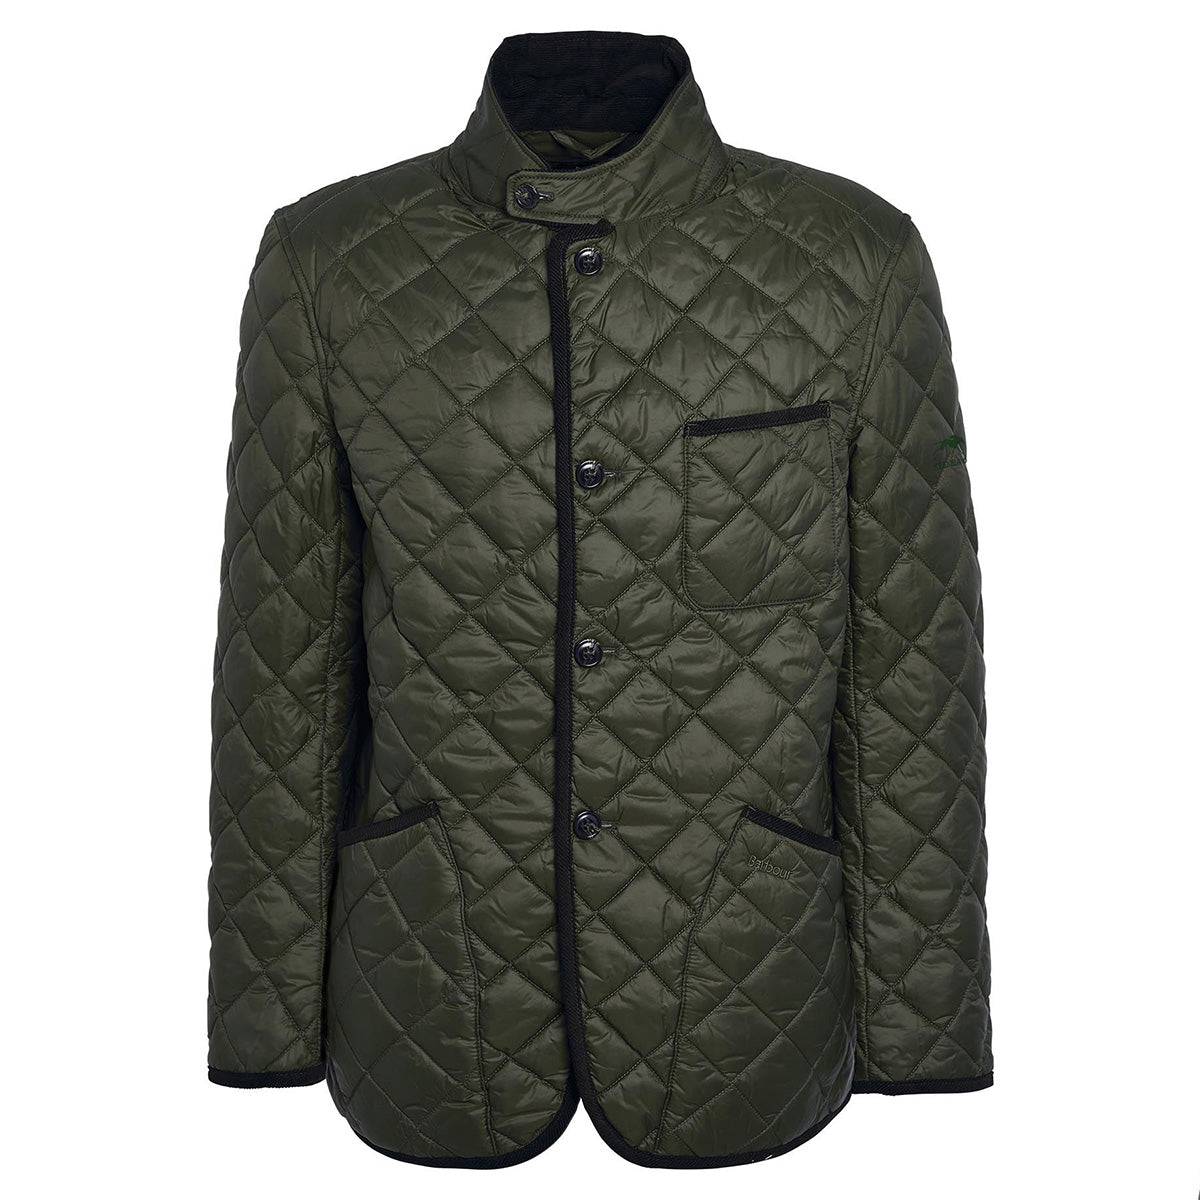 Barbour – The Keeneland Shop